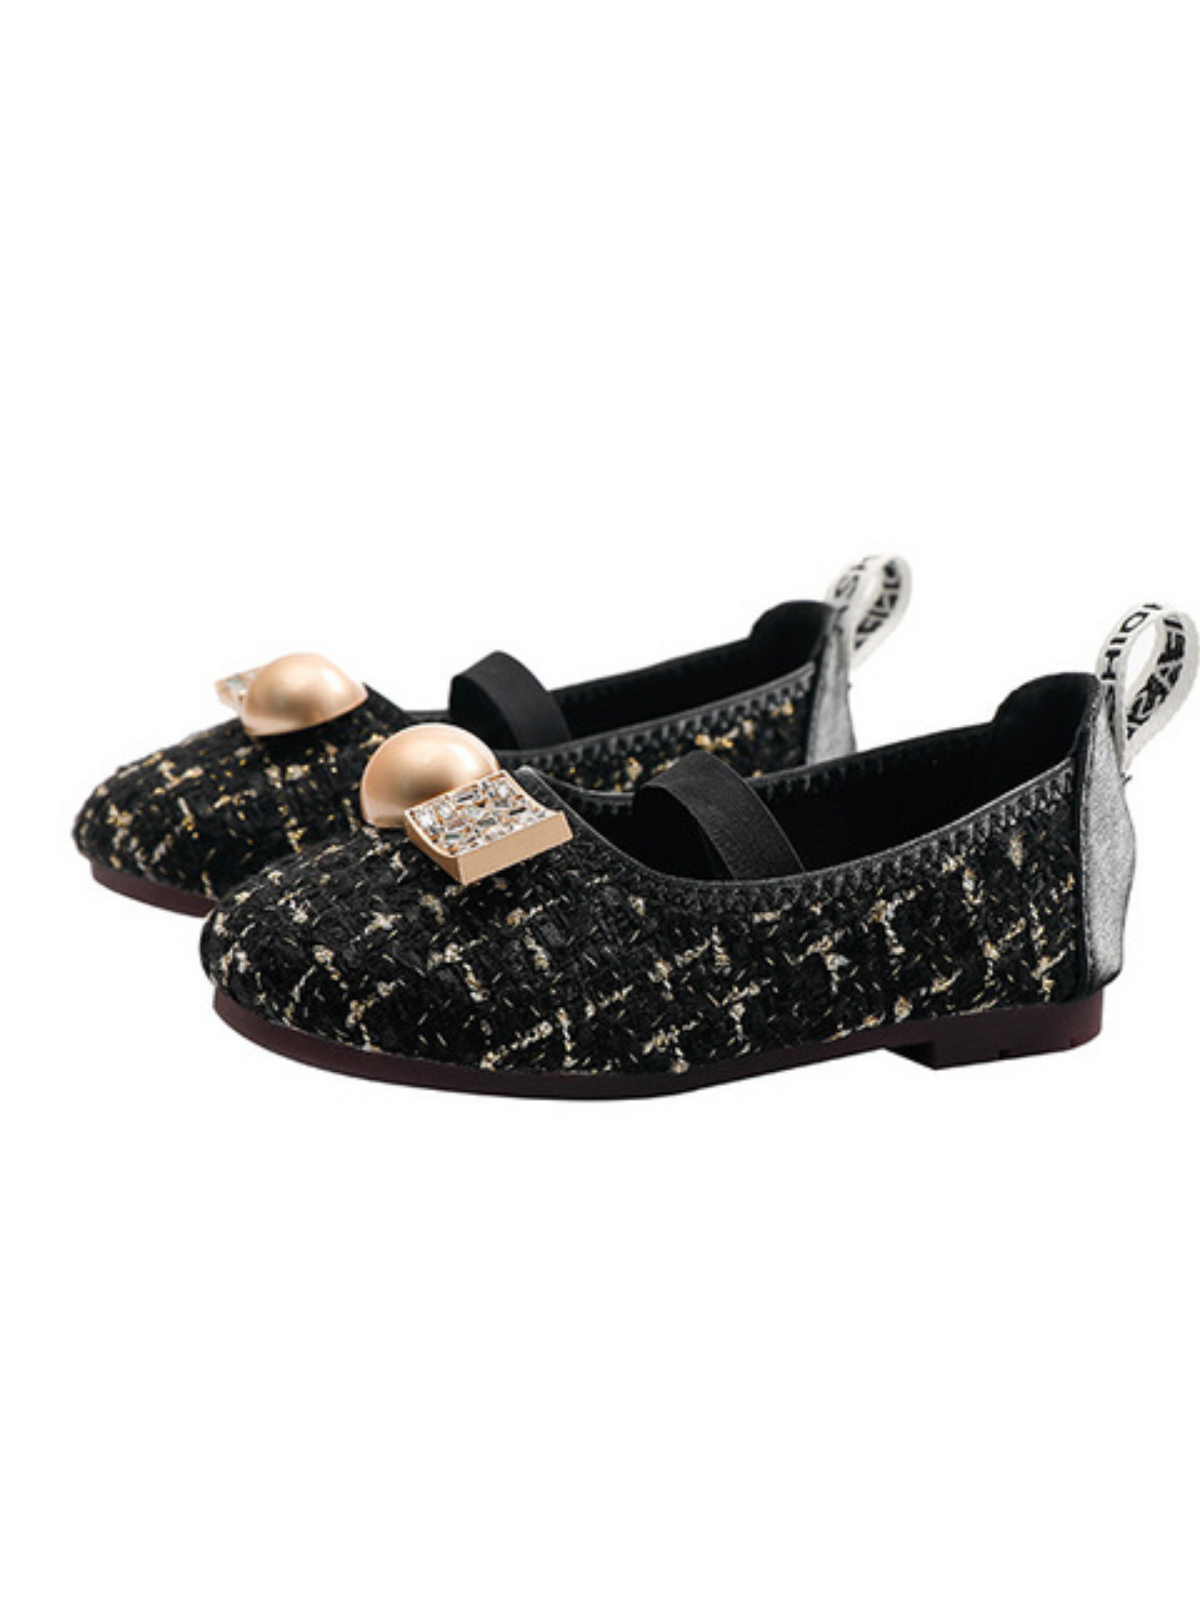 Tweed Classic Mary Jane Flats by Liv and Mia